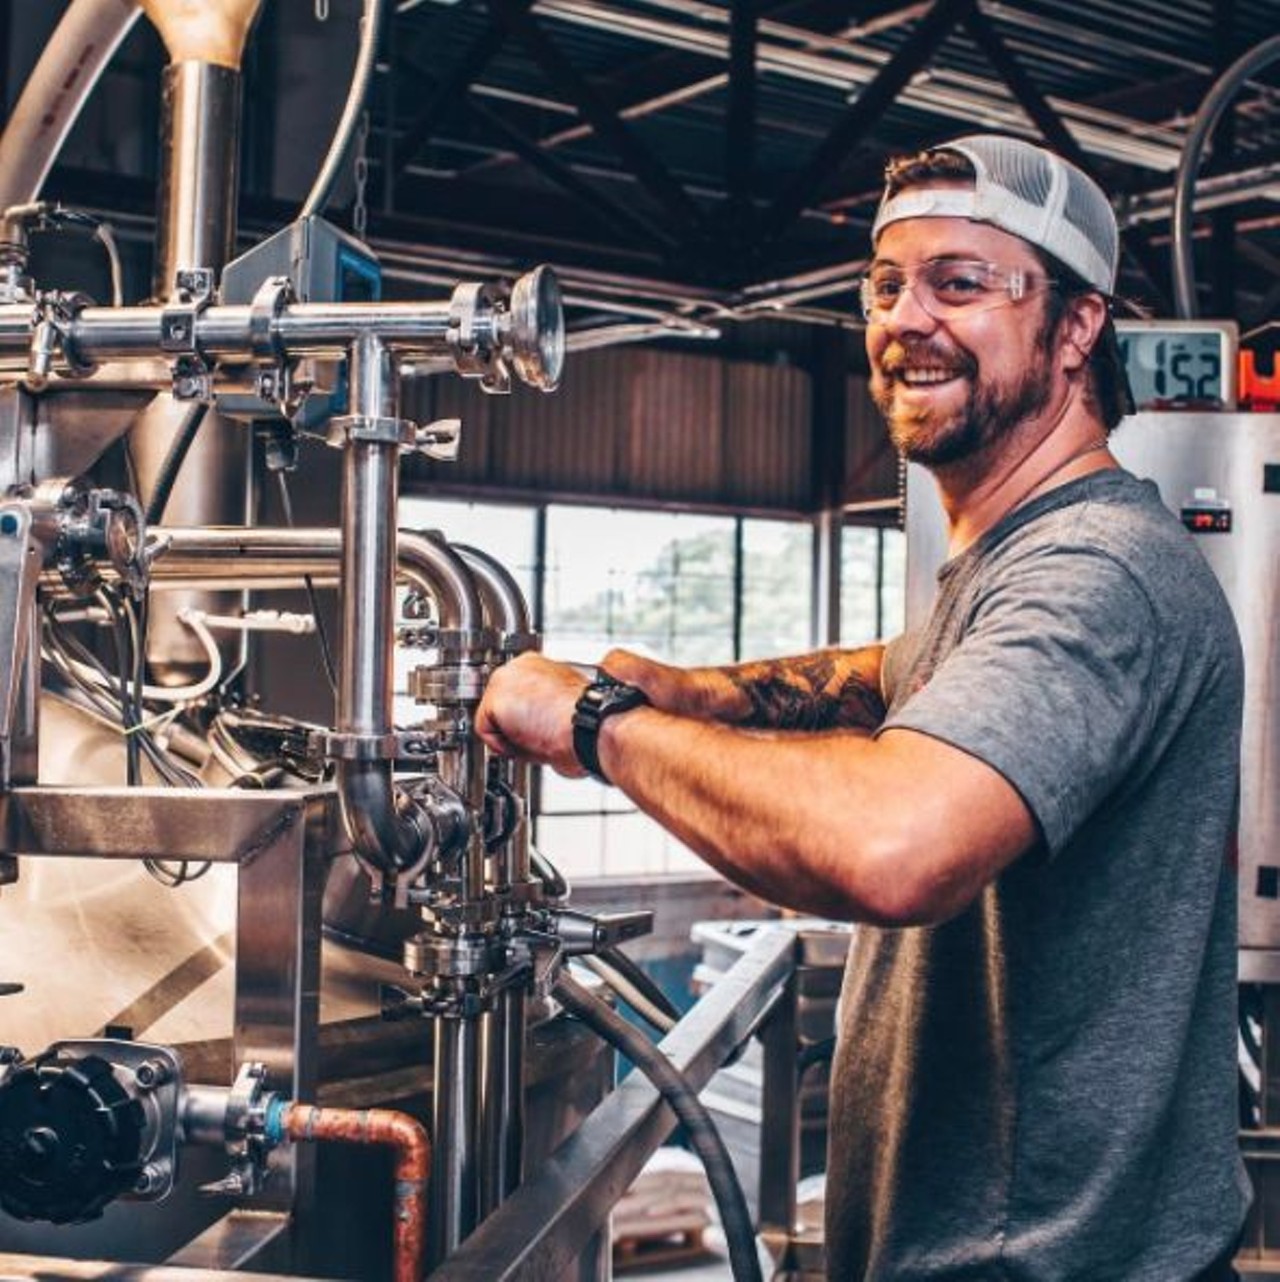 Freetail Brewing Company
2000 S. Presa St., (210) 625-6000, freetailbrewing.com
Come see where all the magic happens with tours at 3 and 5 p.m. on Saturdays. You can even swing by for a quick yoga sesh and enjoy a brew afterward on Thursdays.
Photo via Instagram, palaciostx